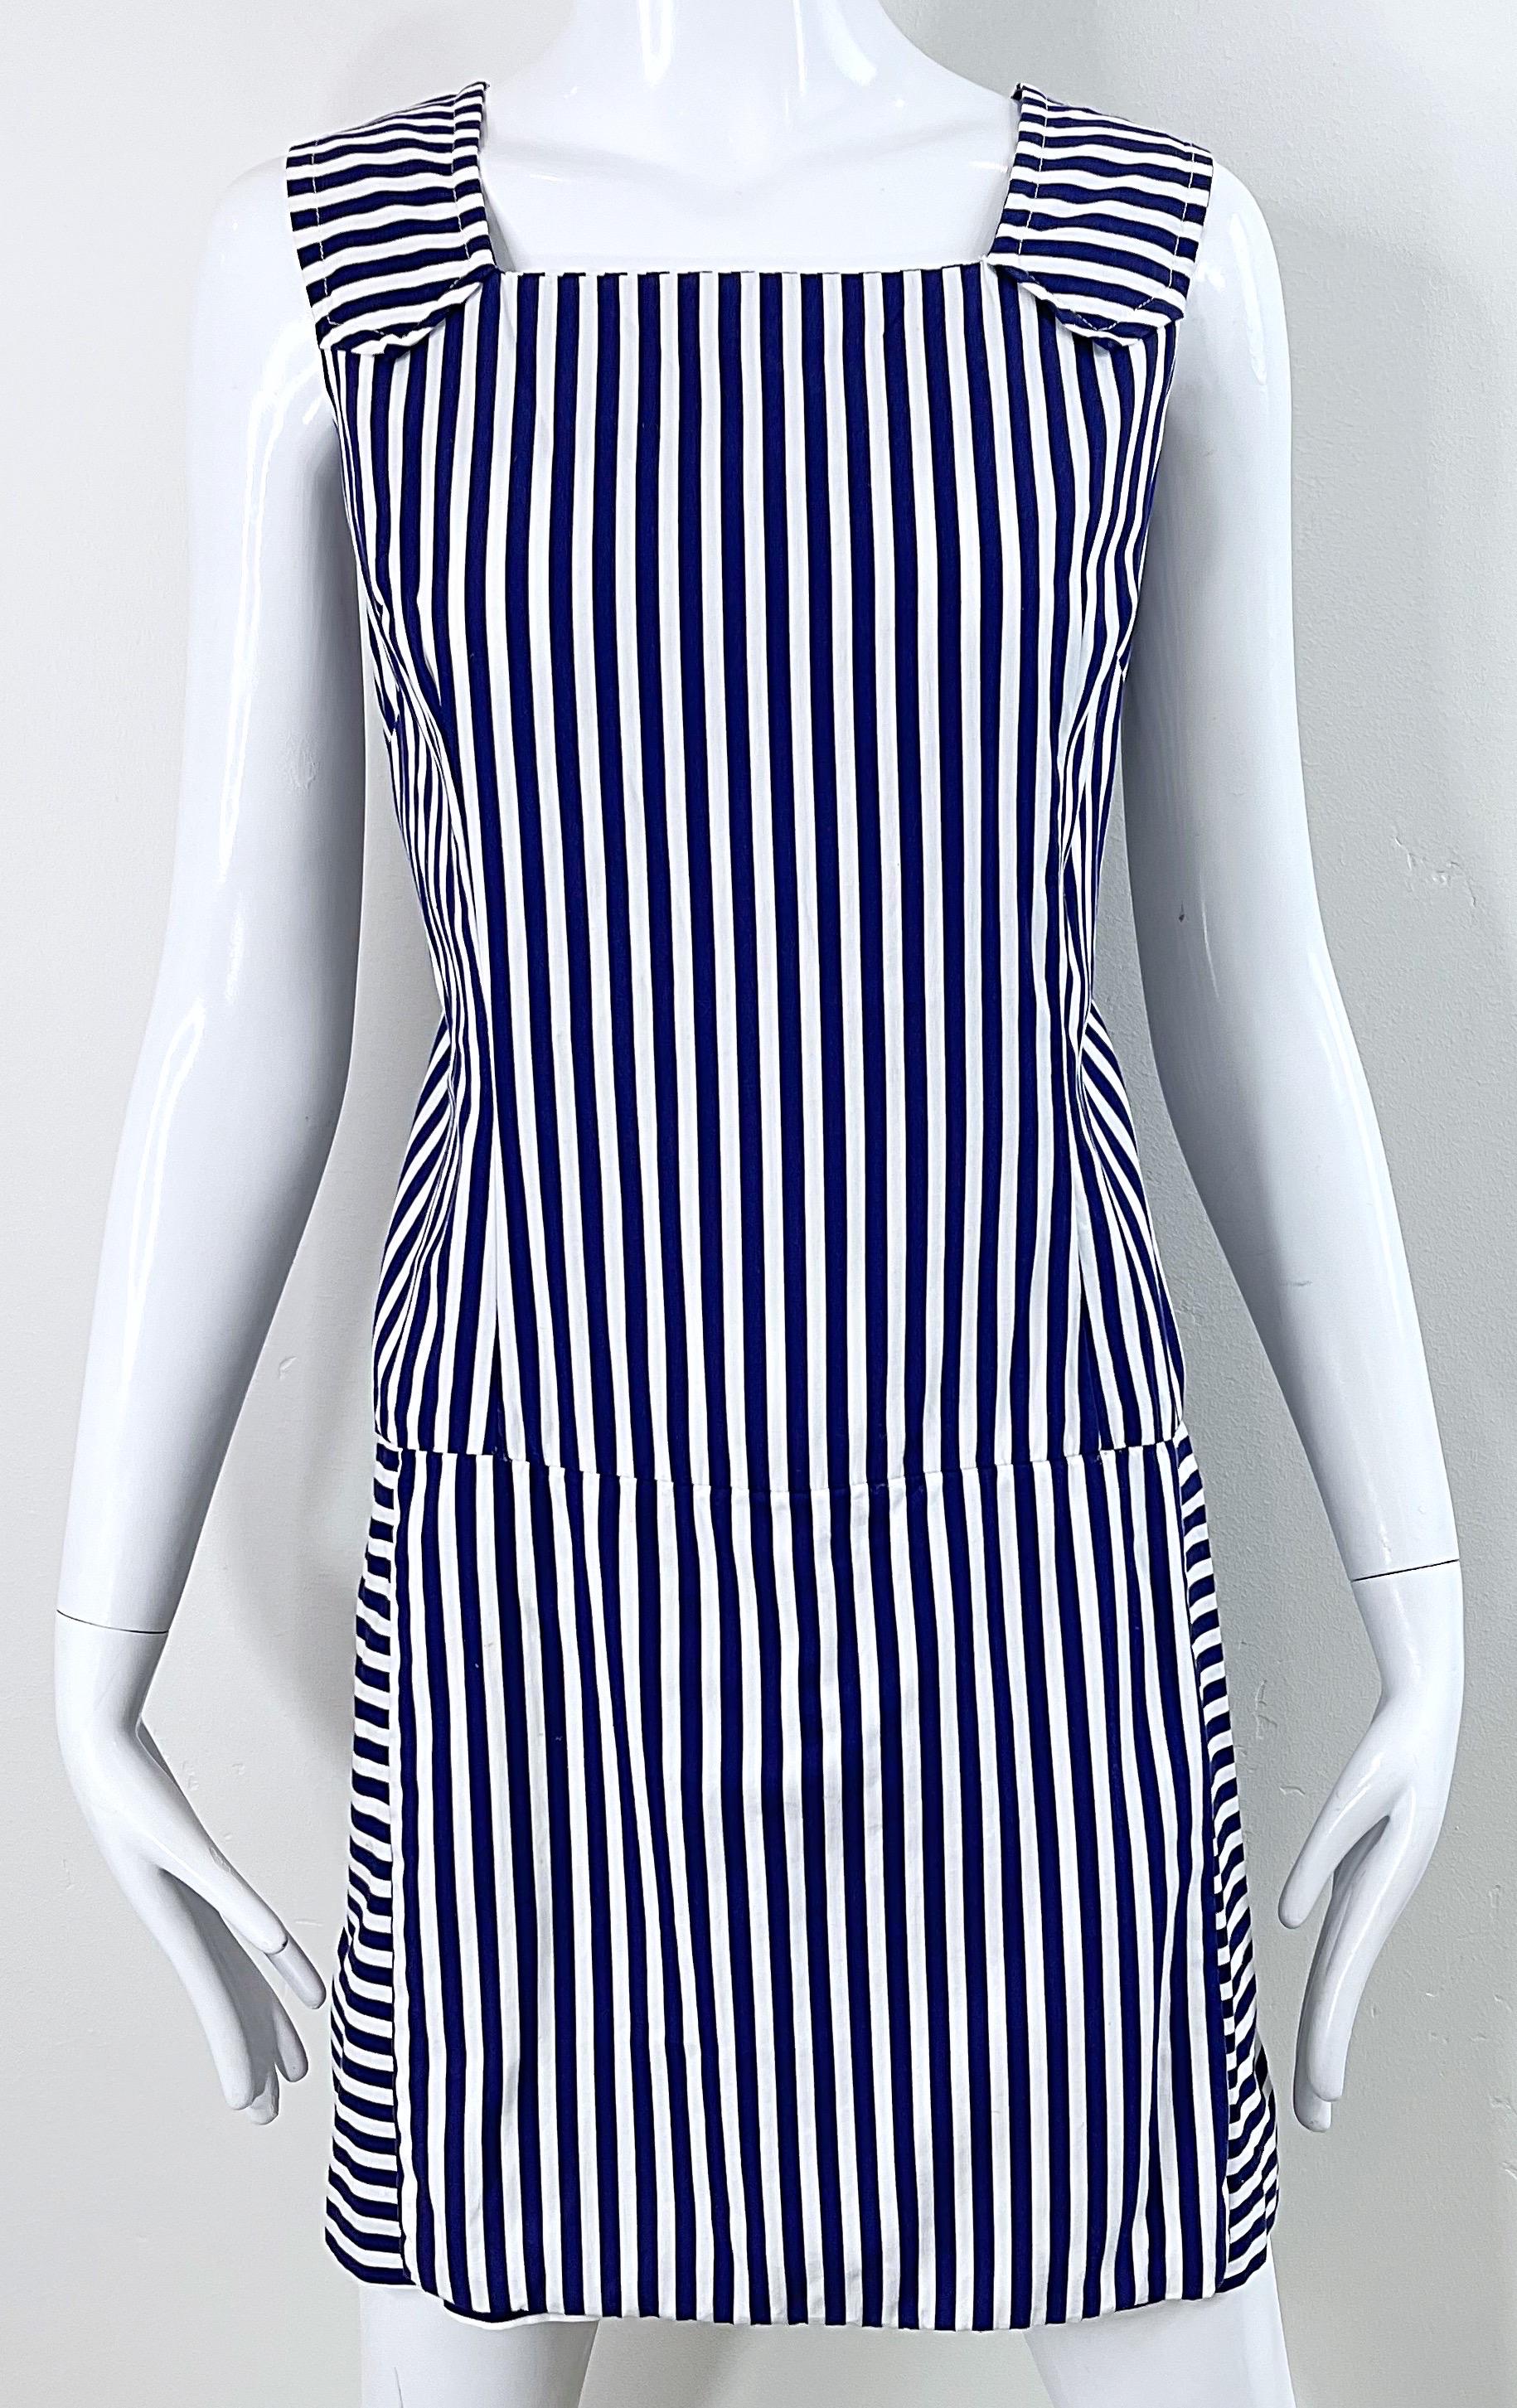 1960s Romper Large Size Navy + White Striped Cotton Vintage 60s Skort Dress In Excellent Condition For Sale In San Diego, CA